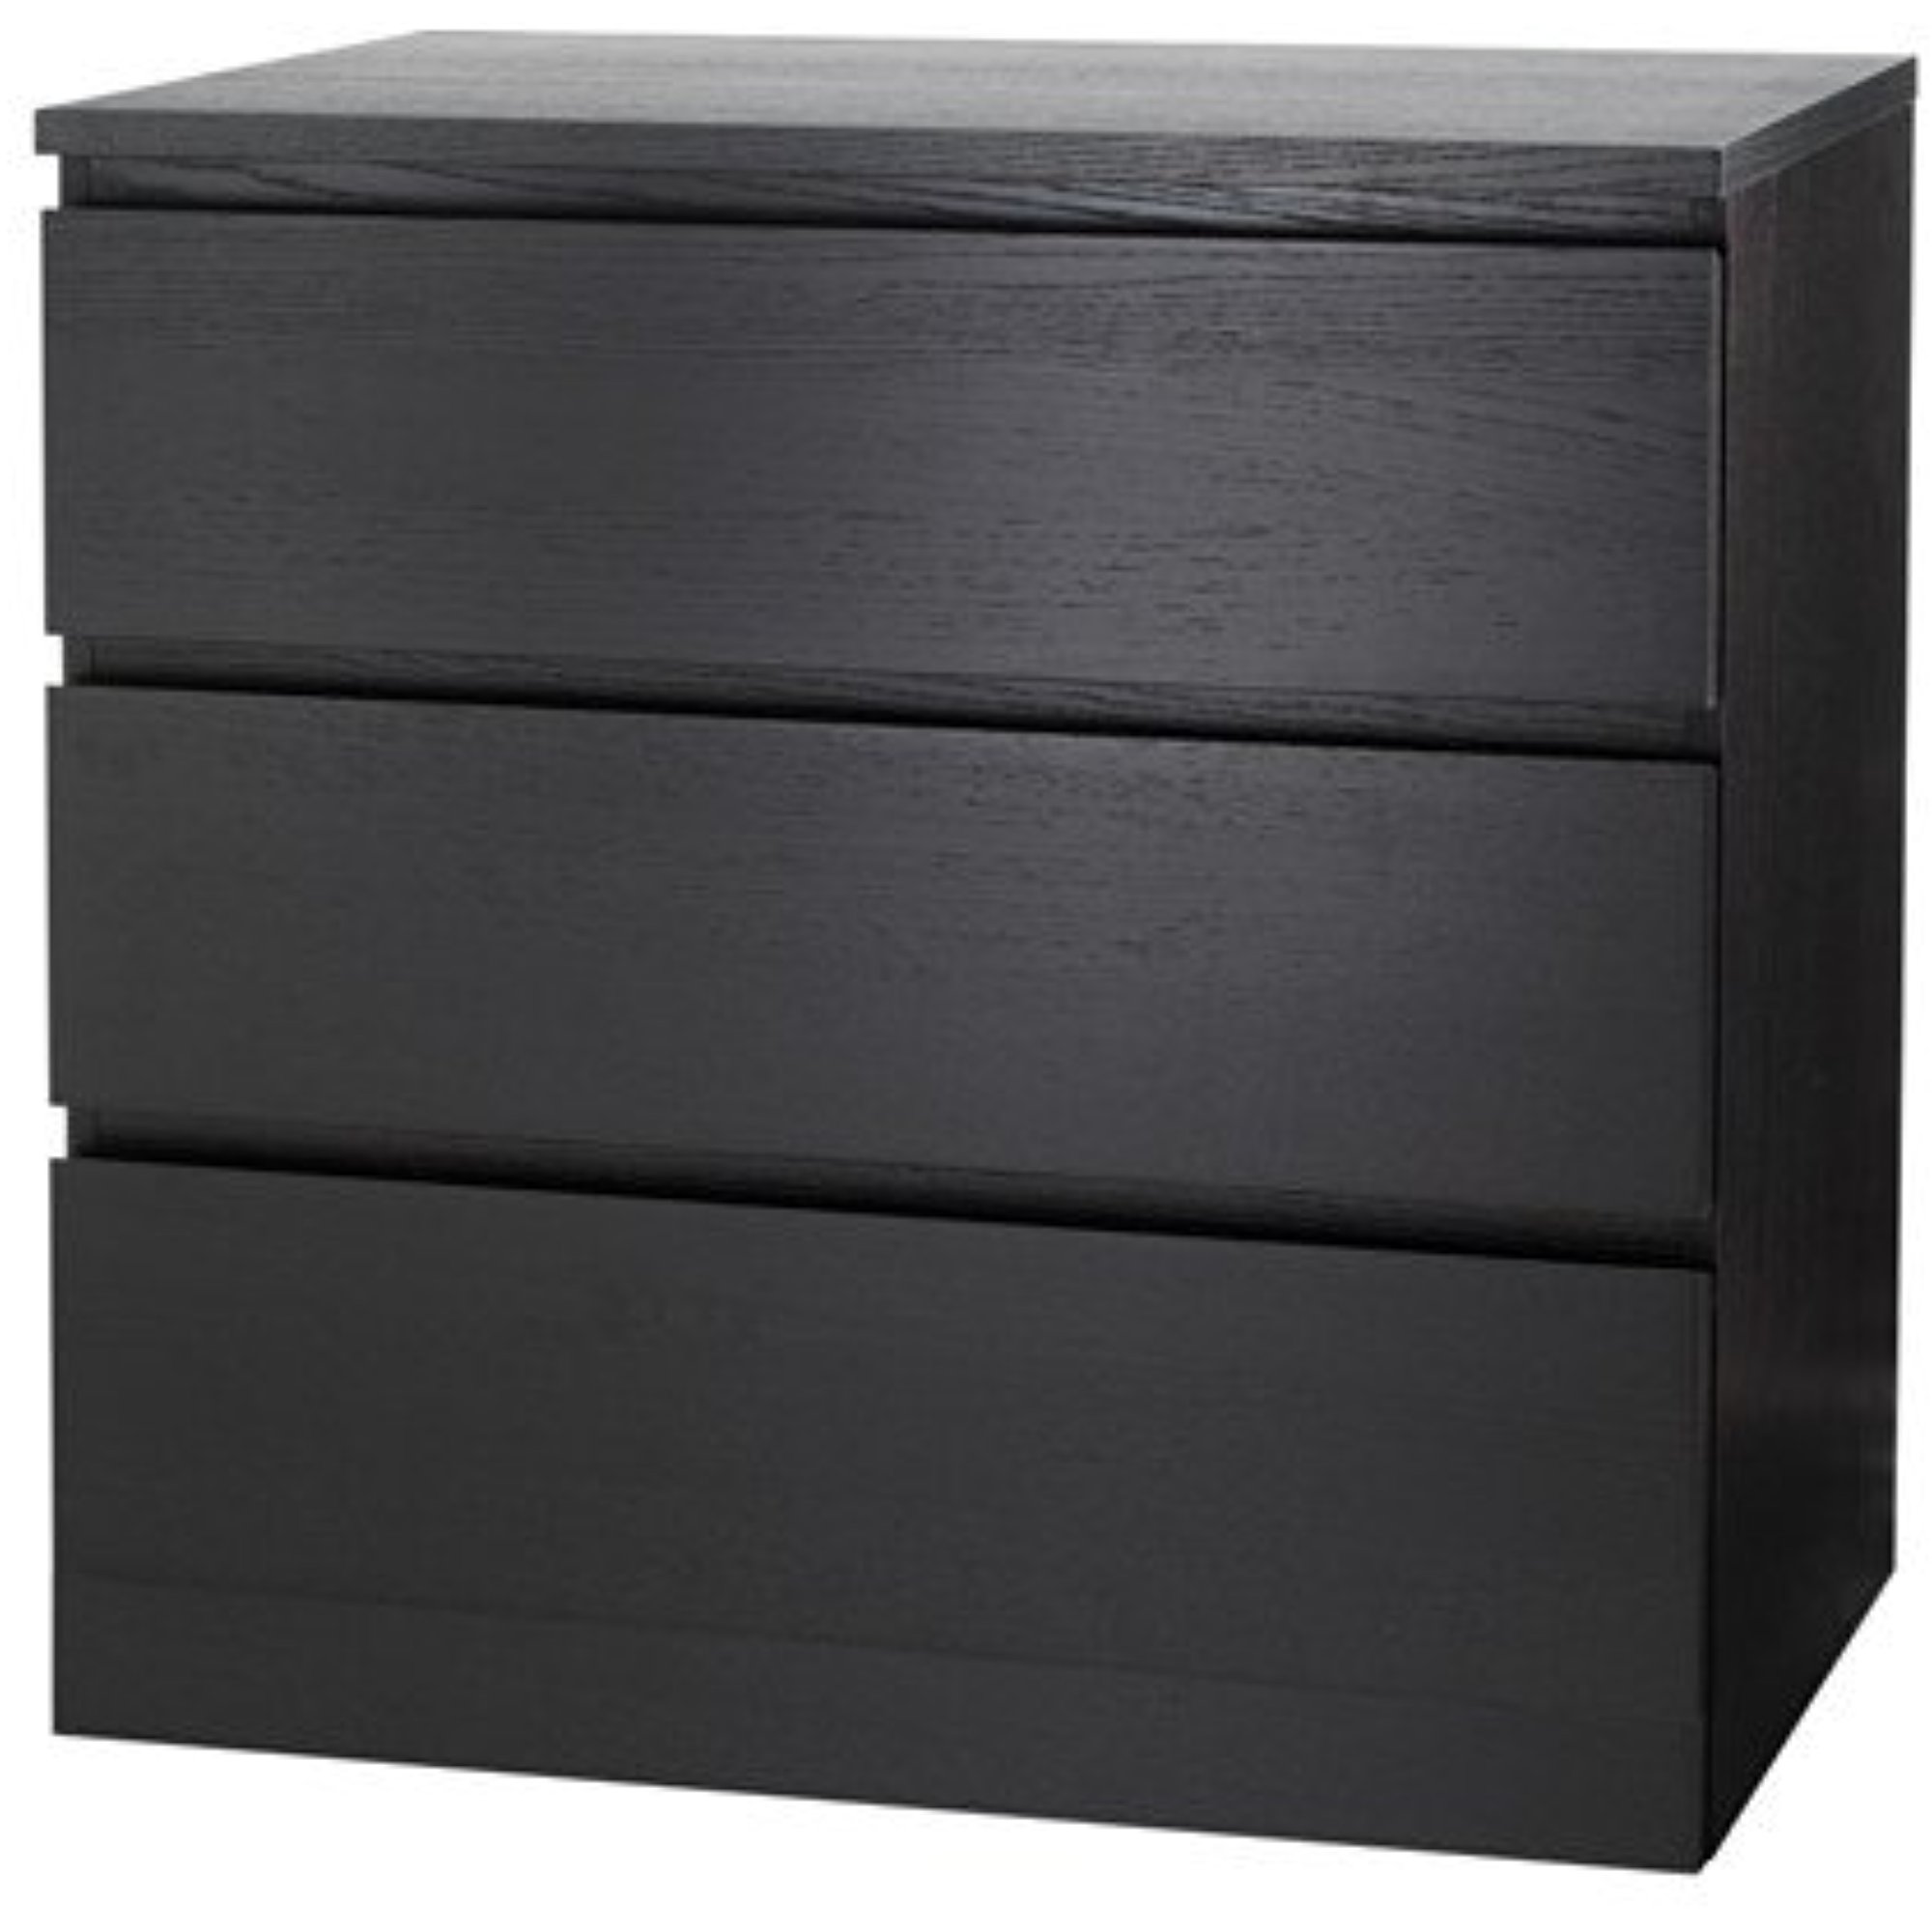 Black - 3 Drawer Chest 3 Drawer With Metal Handles /& Runners Home Livingroom Hallway Storage Wellgarden Black Chest of Drawers Bedroom Furniture Tall Chest of Drawers